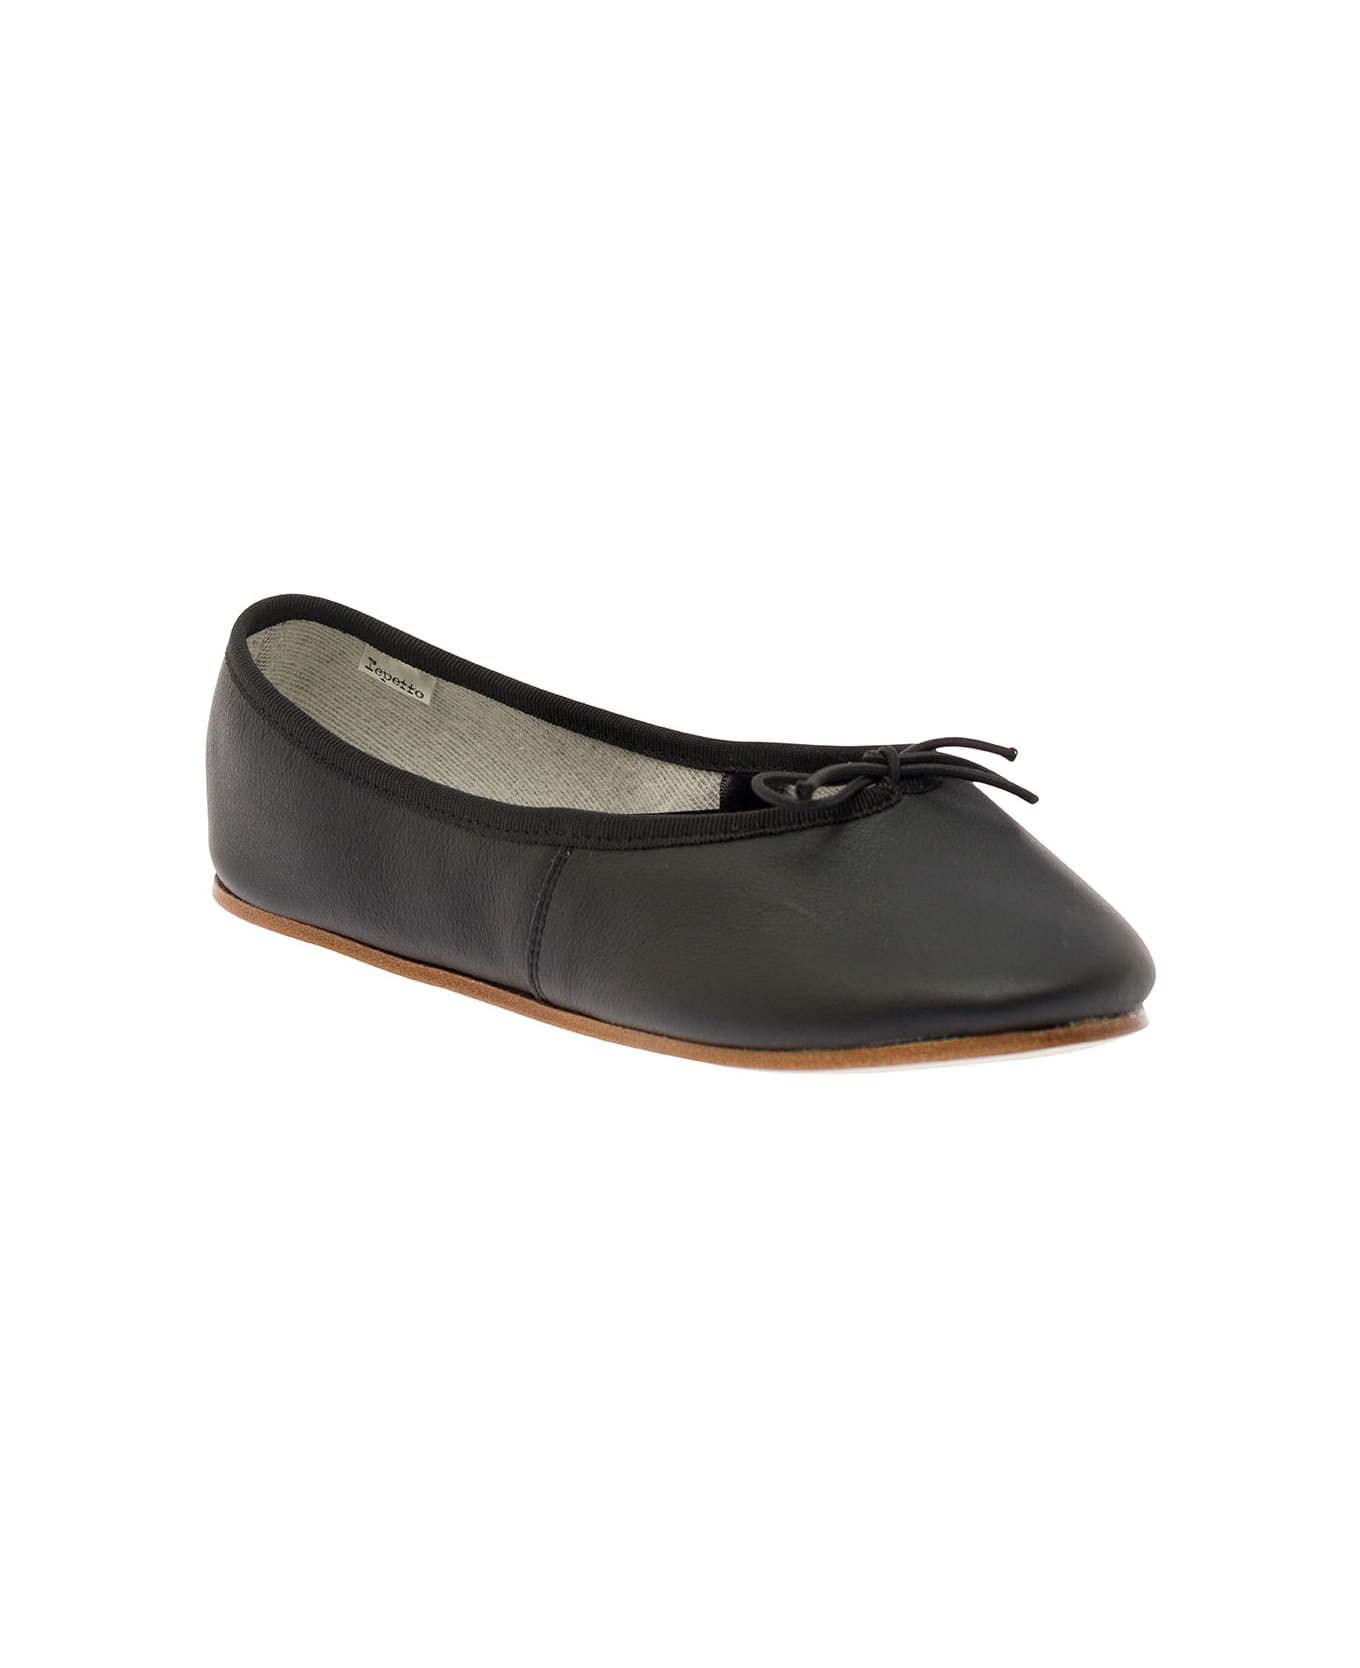 Repetto 'sofia' Black Ballet Flats With Ribbon In Leather Woman - Black